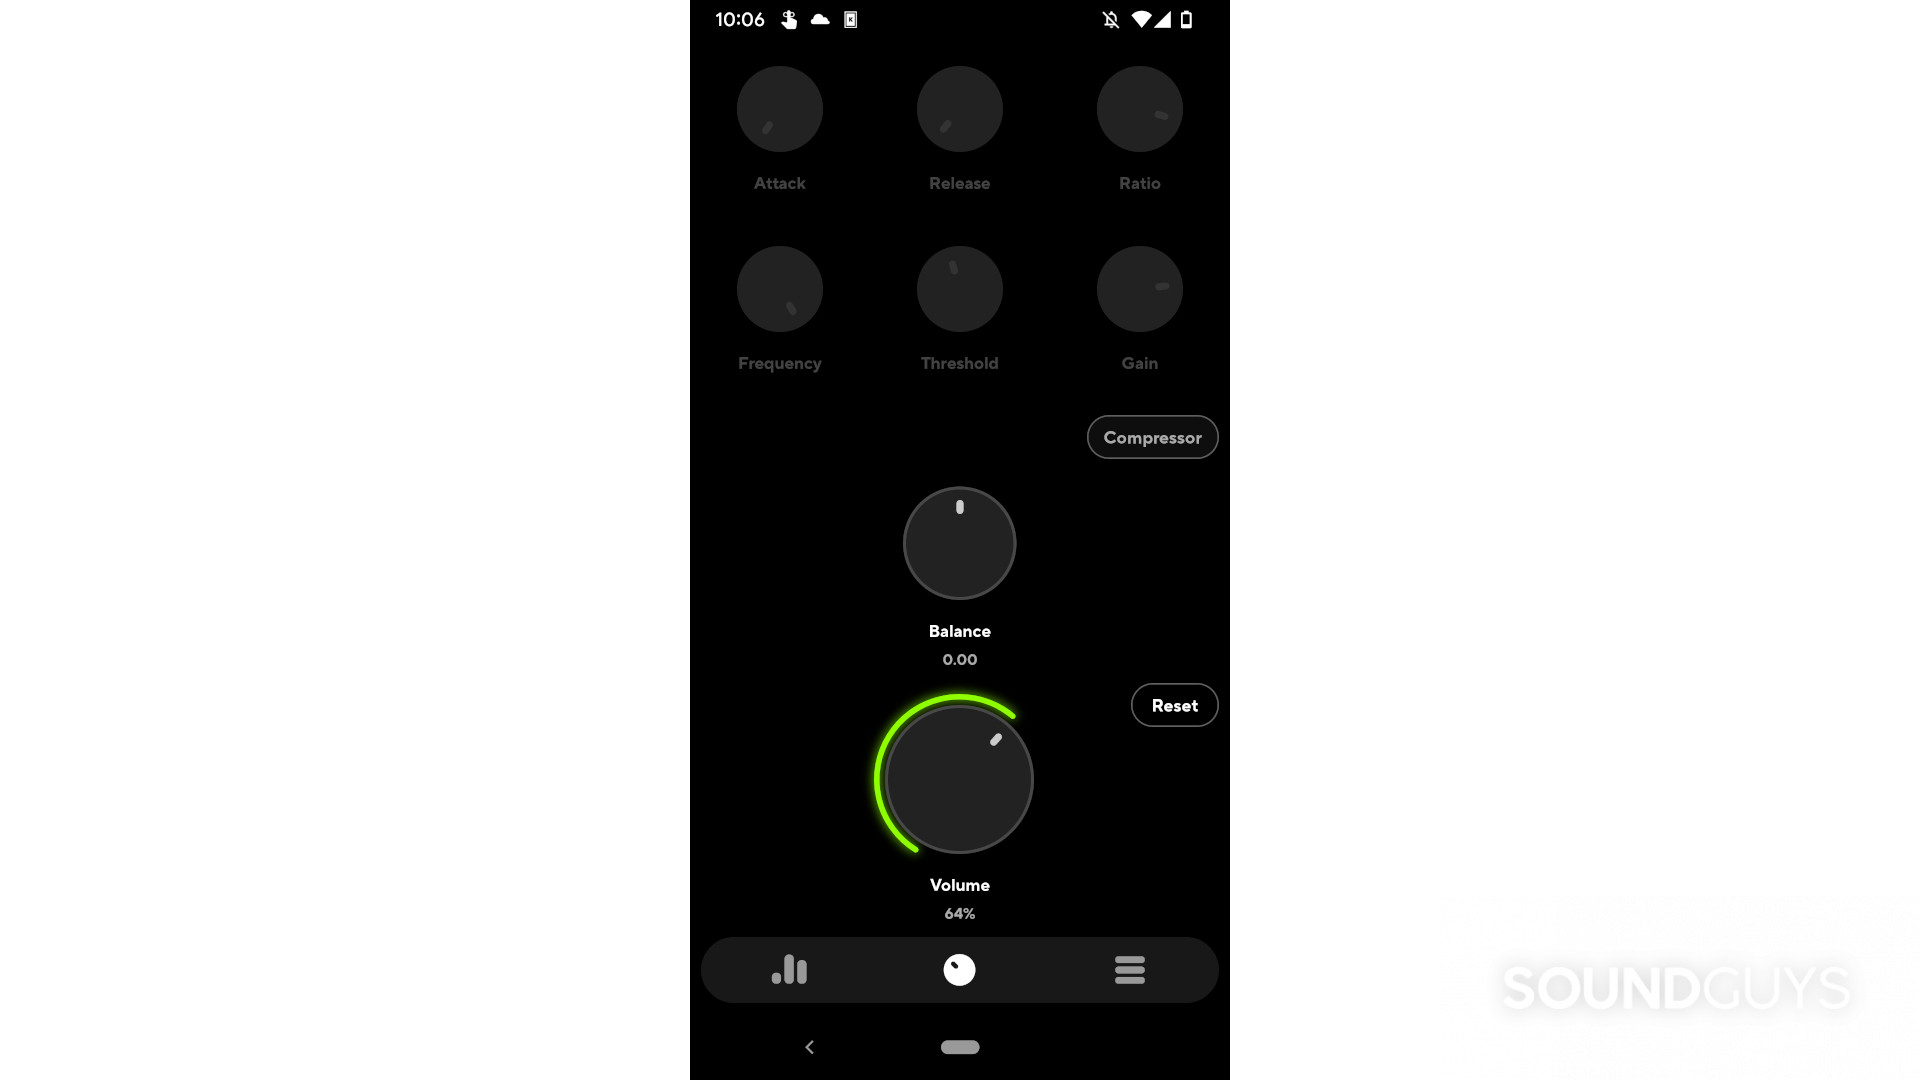 A screenshot of the Poweramp Equalizer showing the available extra dials for more confugration options.